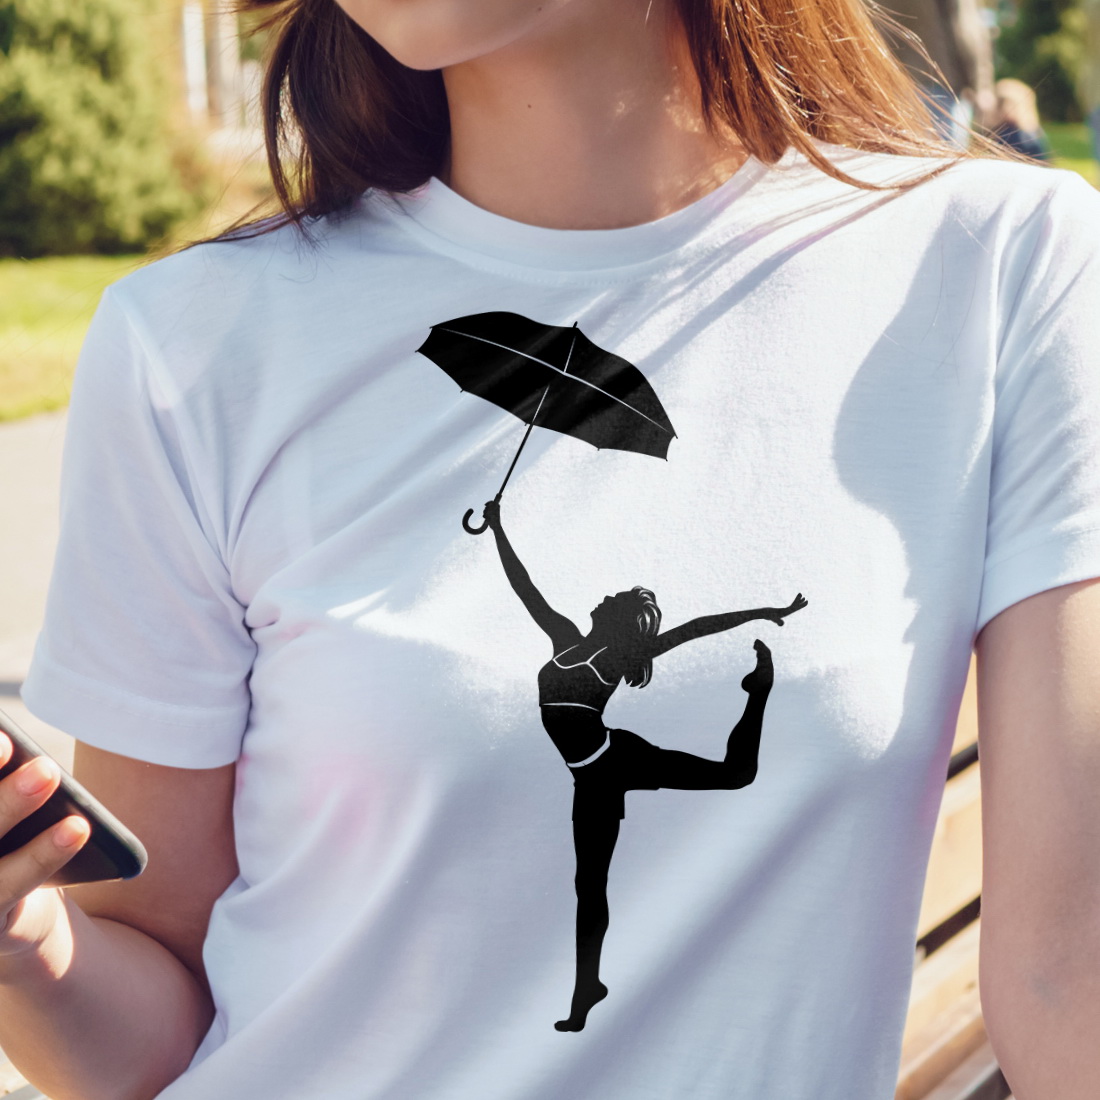 White t-shirt with a dancing woman with an umbrella.